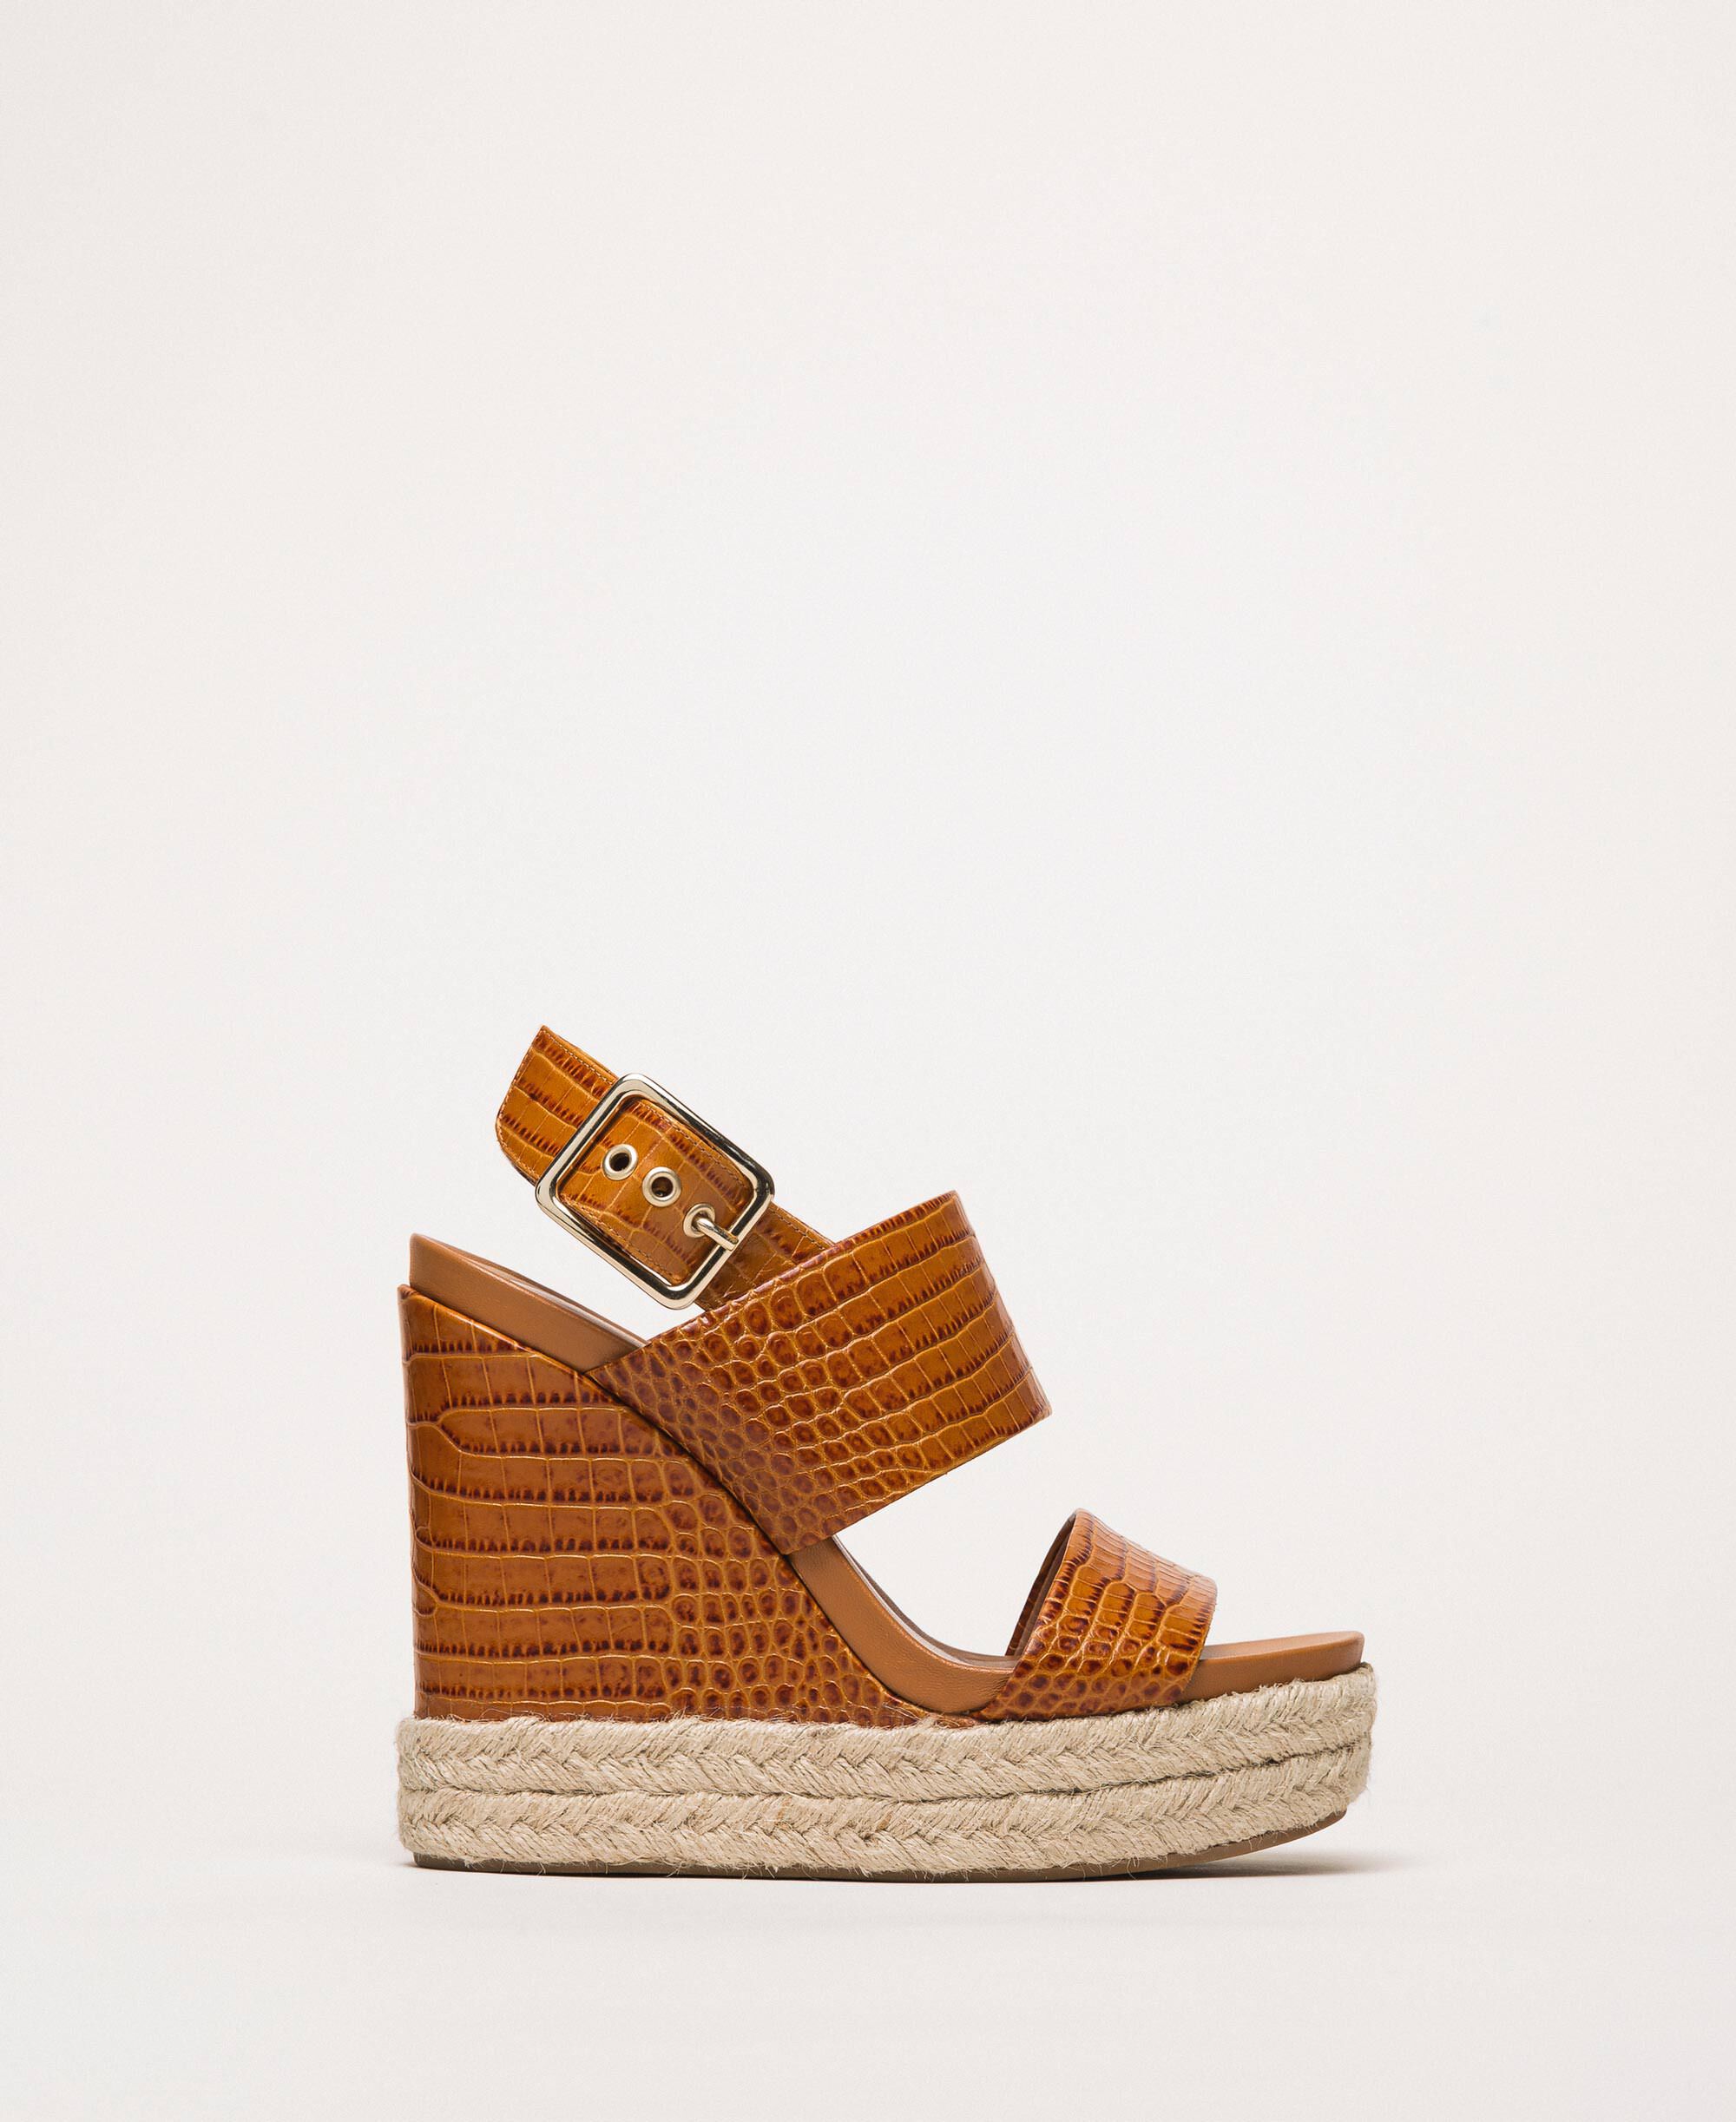 Leather sandals with croc print and wedge